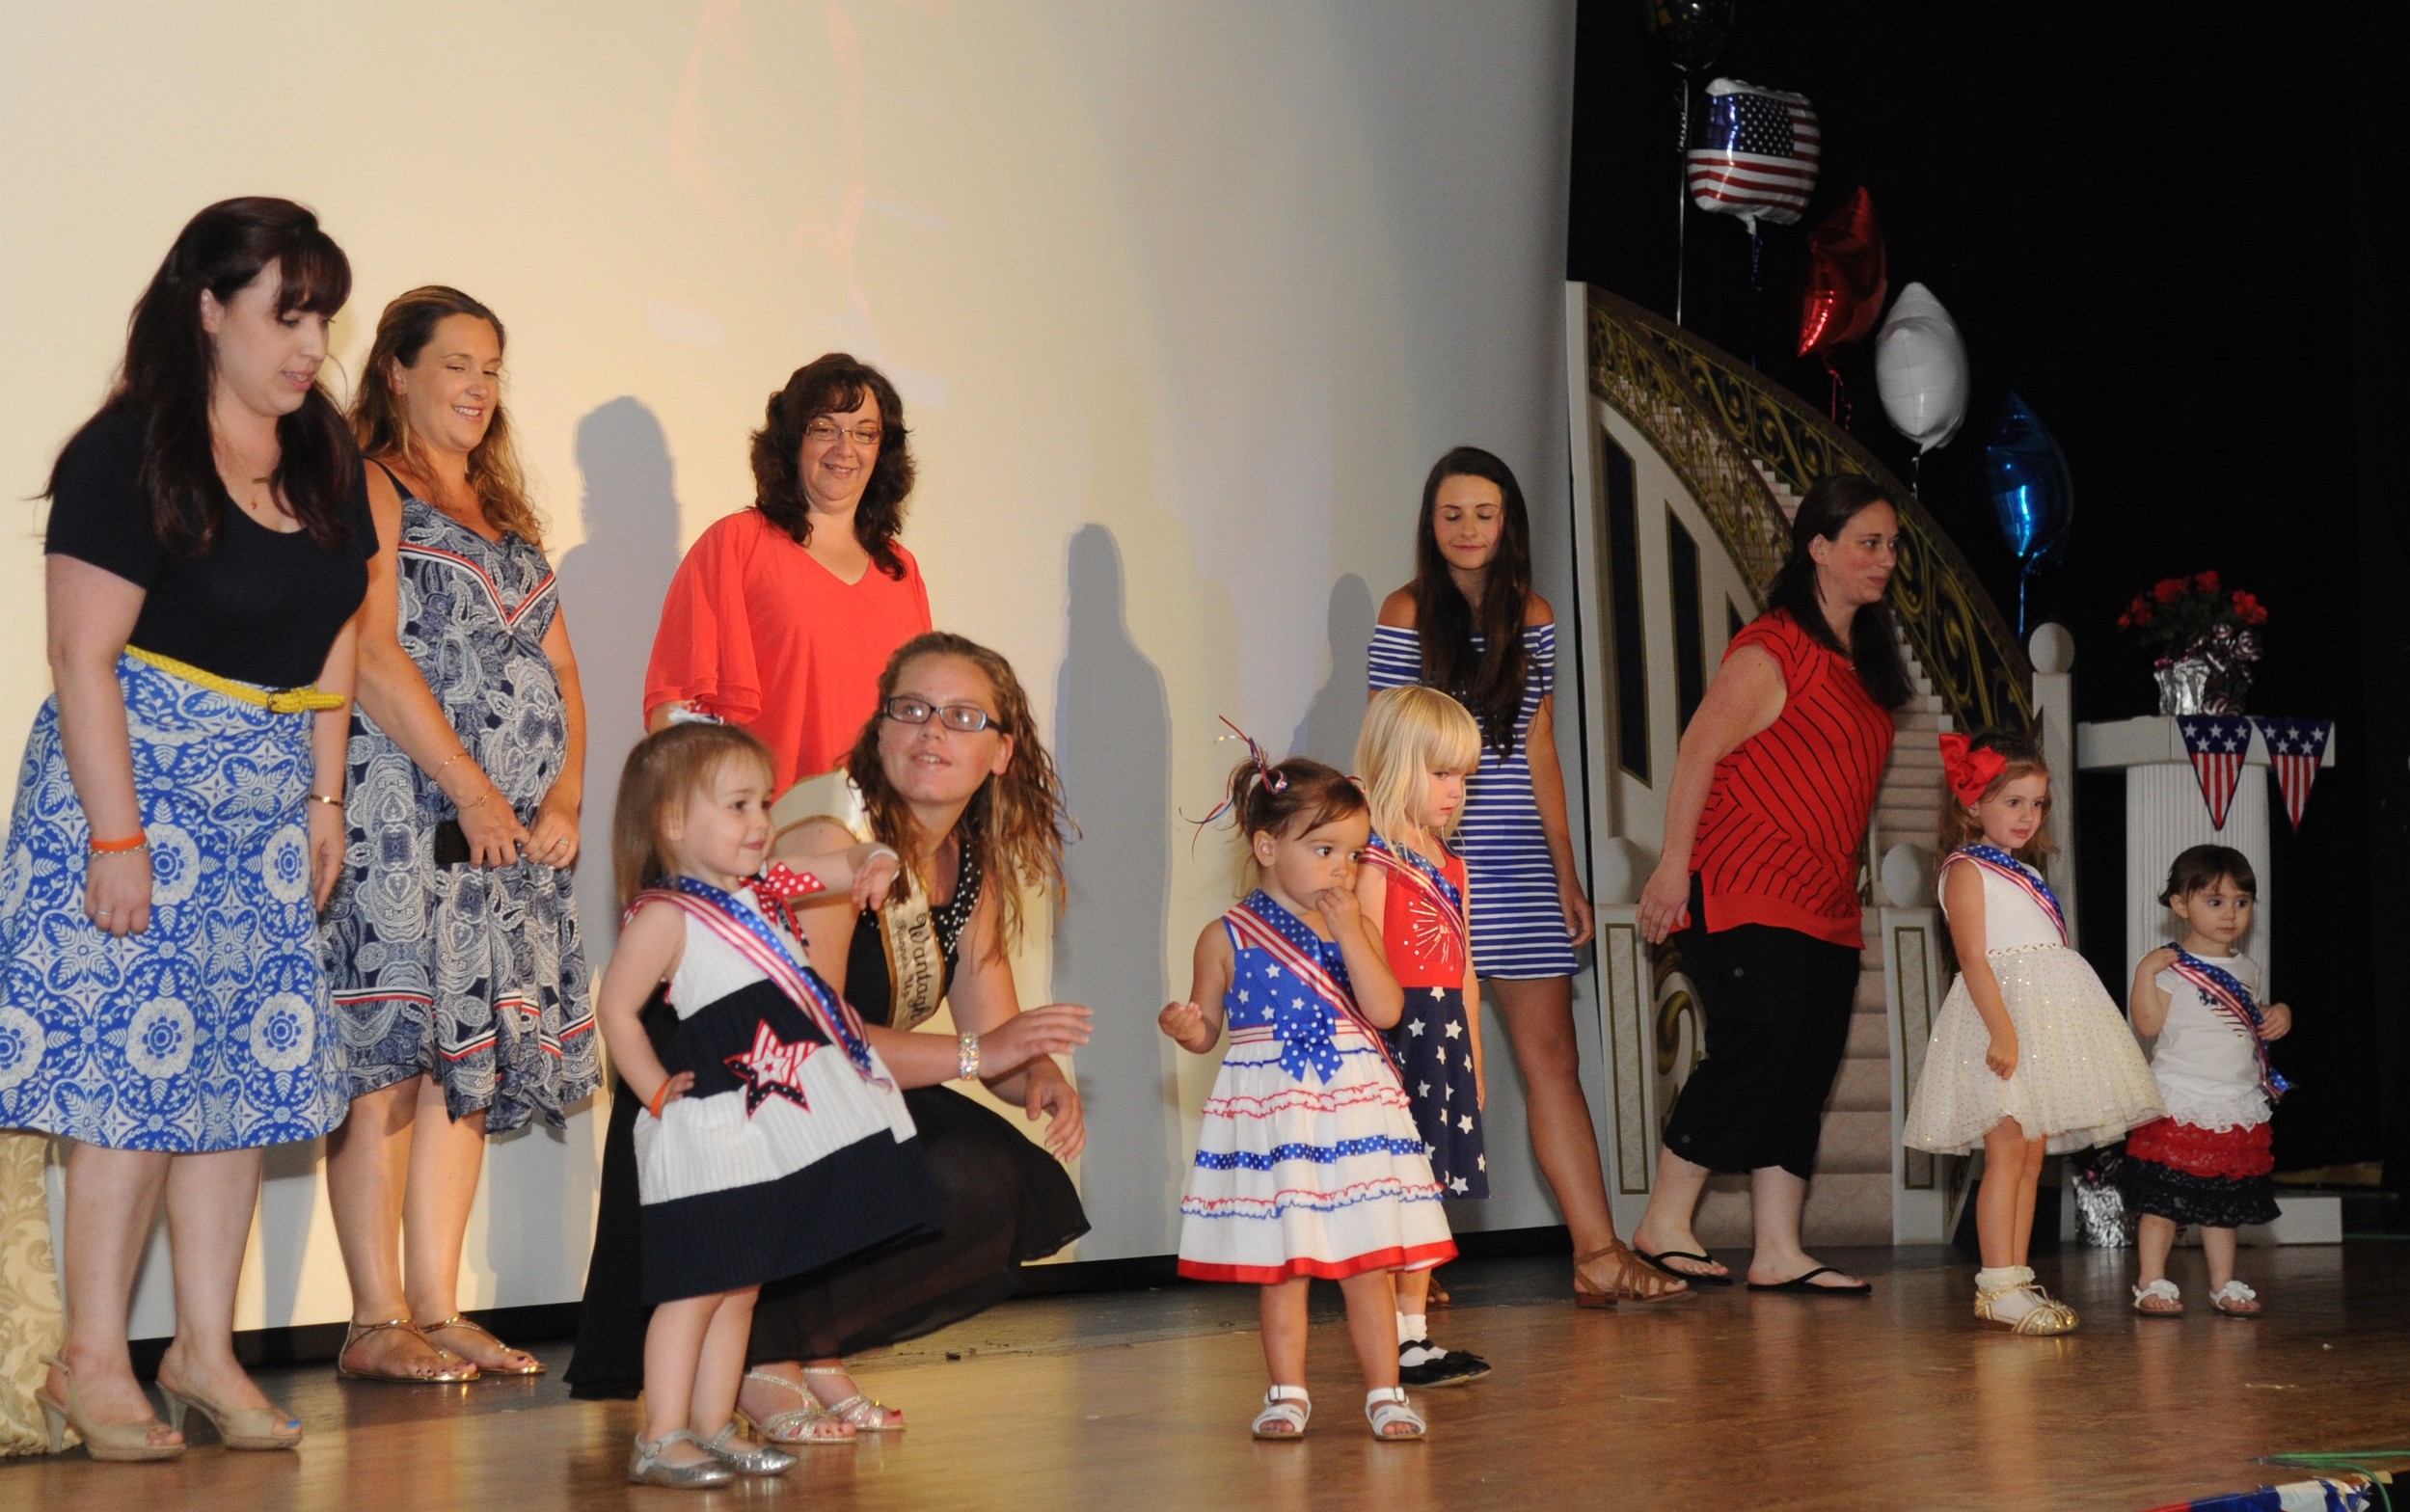 Future Miss Wantagh candidates showed off their dresses on the stage.